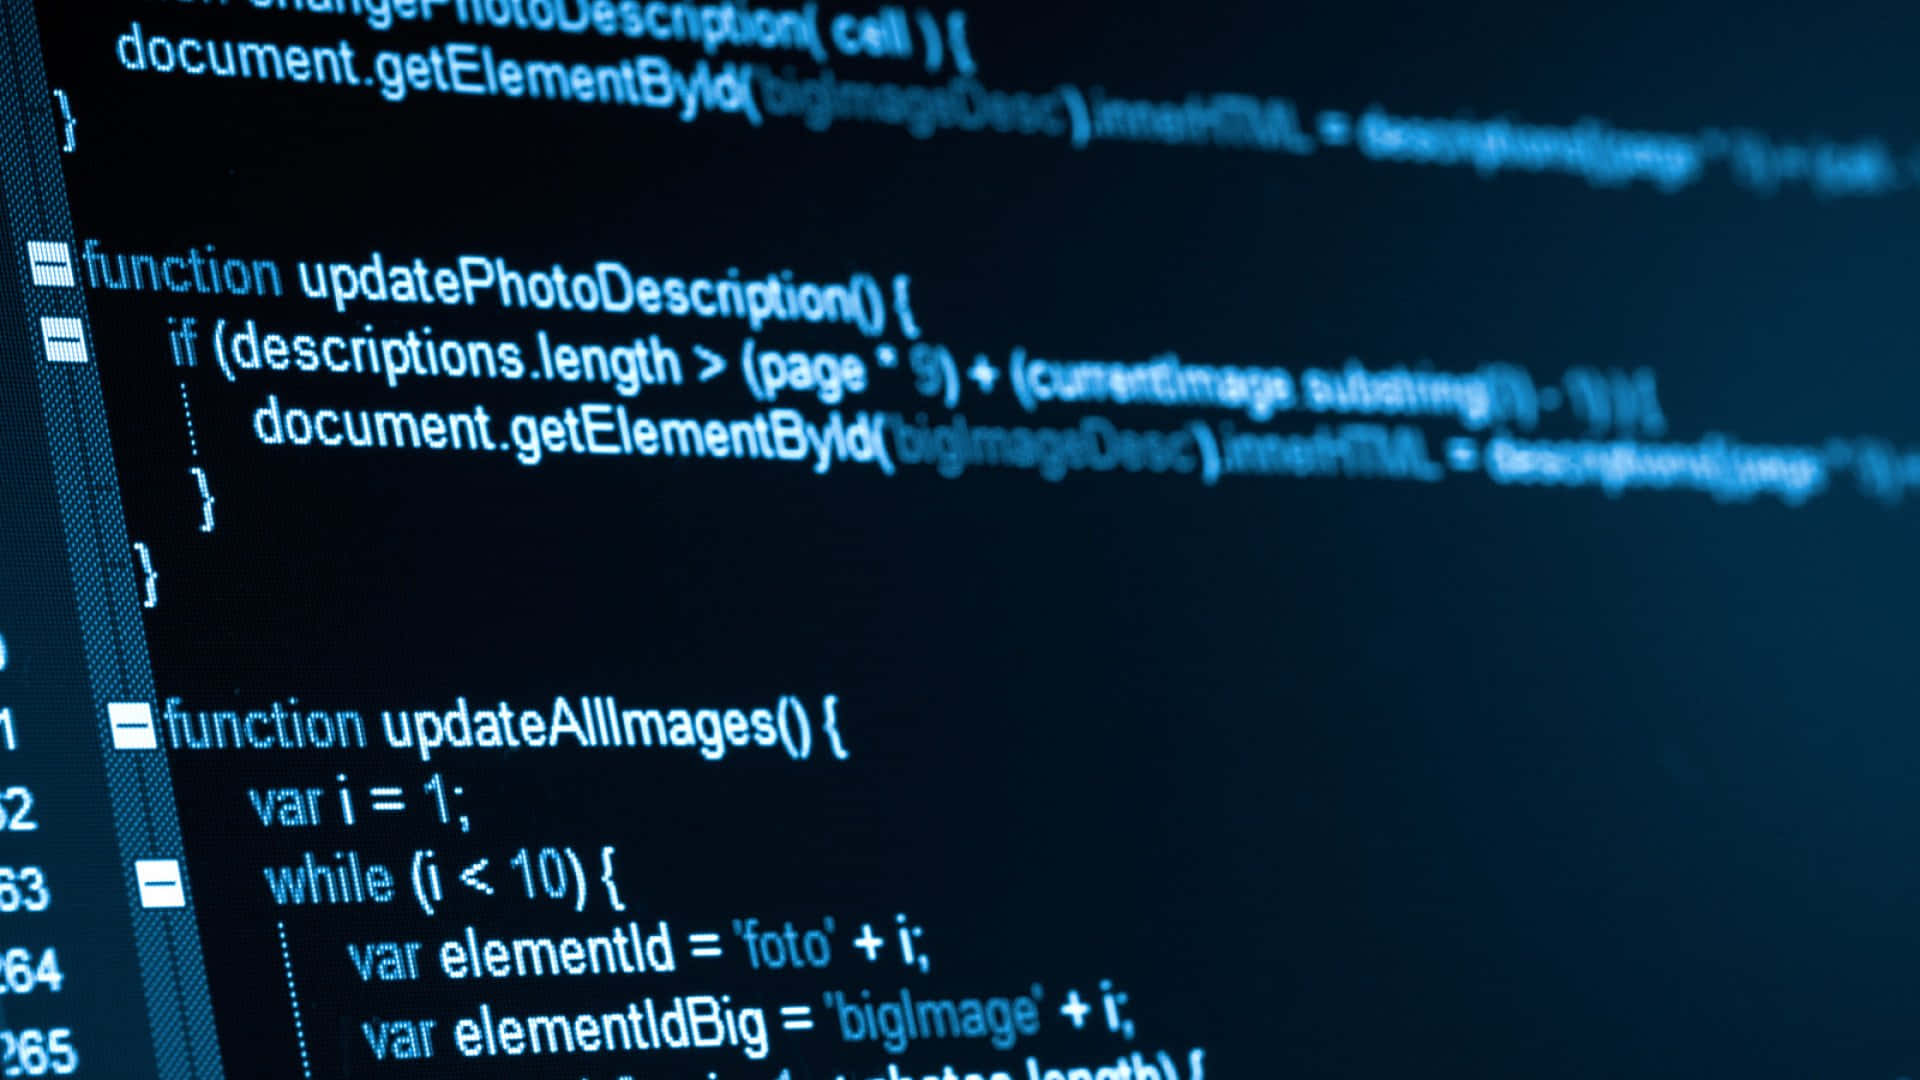 Improve your knowledge by learning the fundamentals of coding